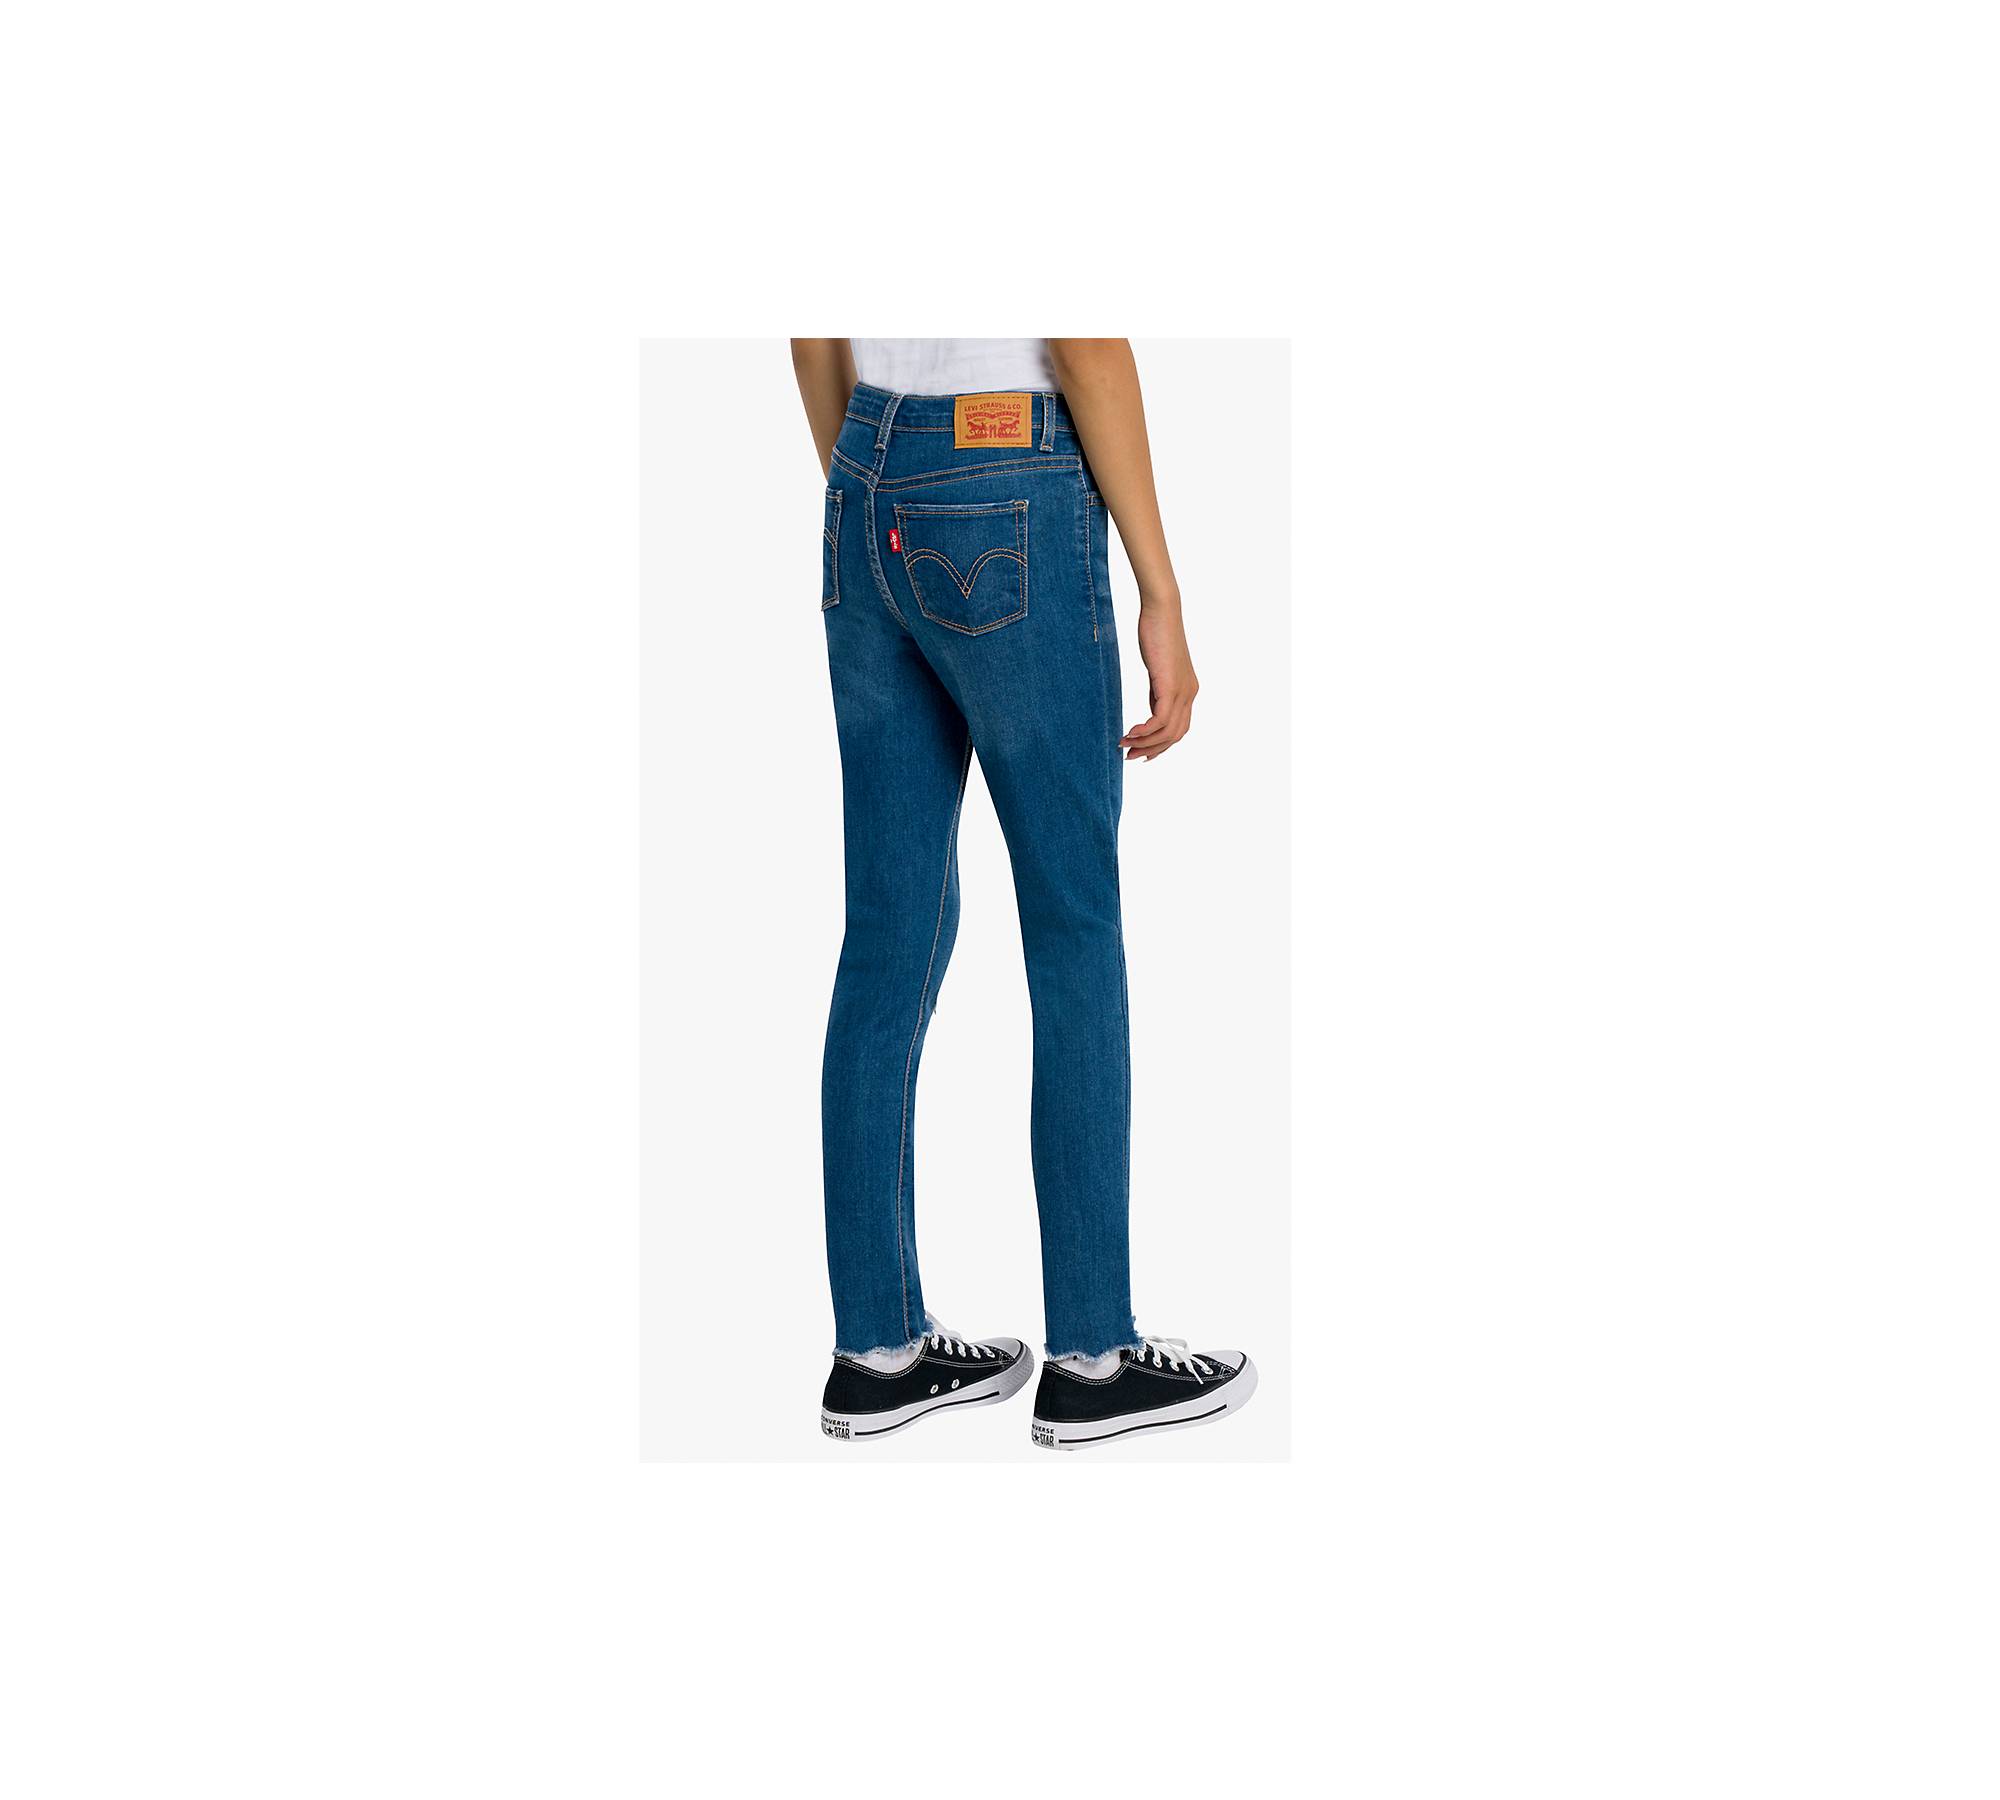 Real Love Girls' Jeans On Sale Up To 90% Off Retail